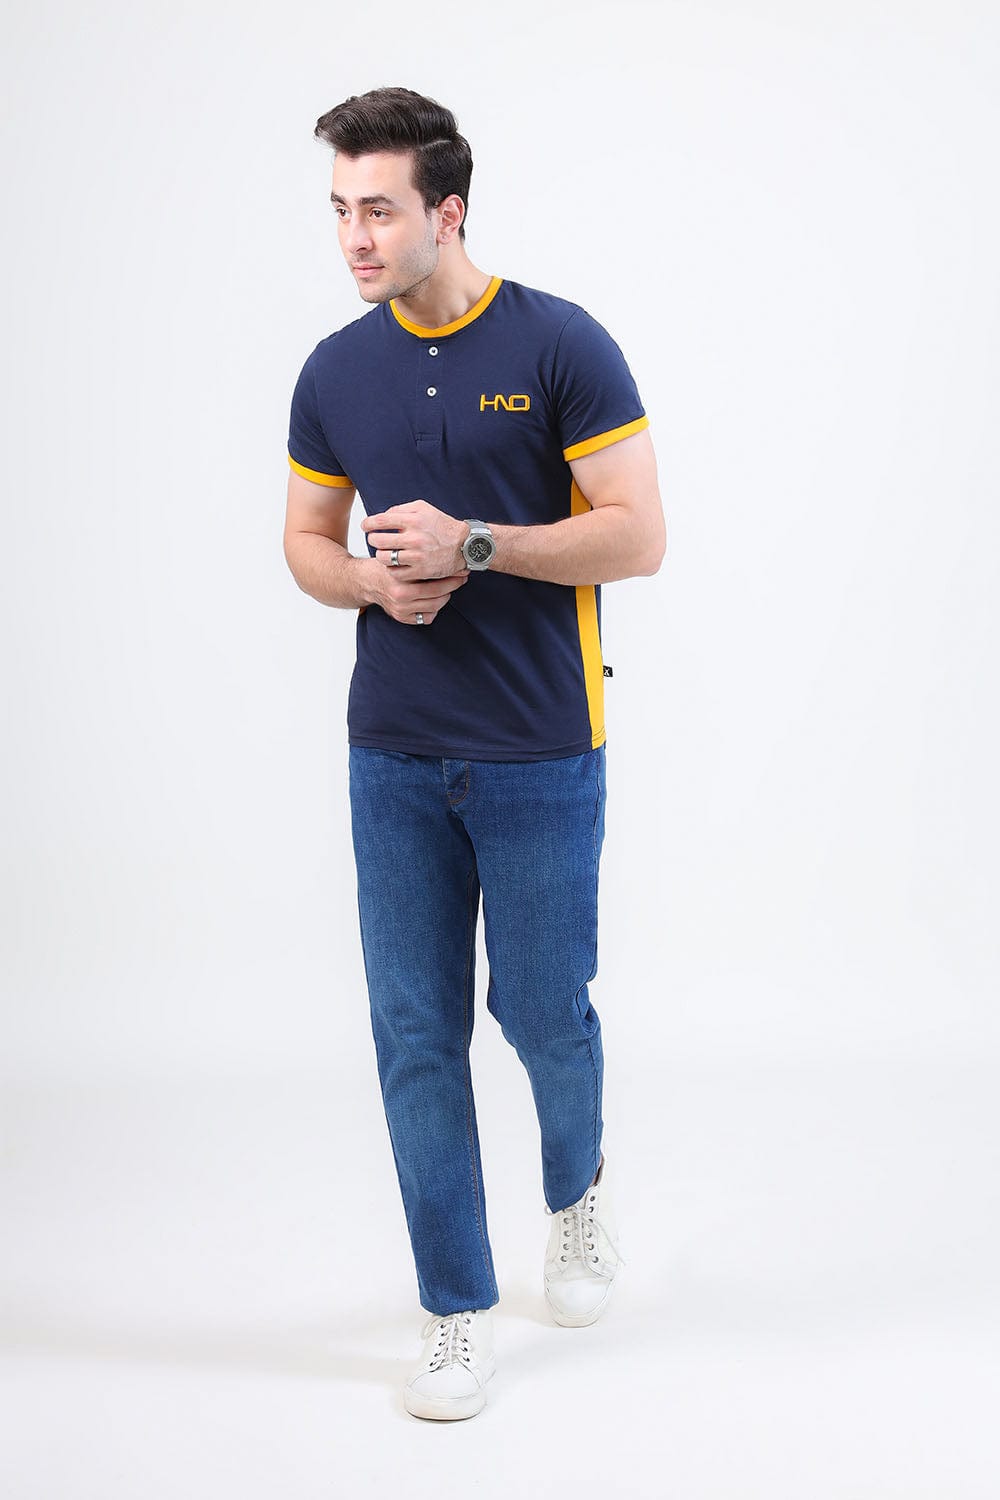 Hope Not Out by Shahid Afridi Men T-Shirt HNO Blue Henley with Embroidered Logo and Contrast Details